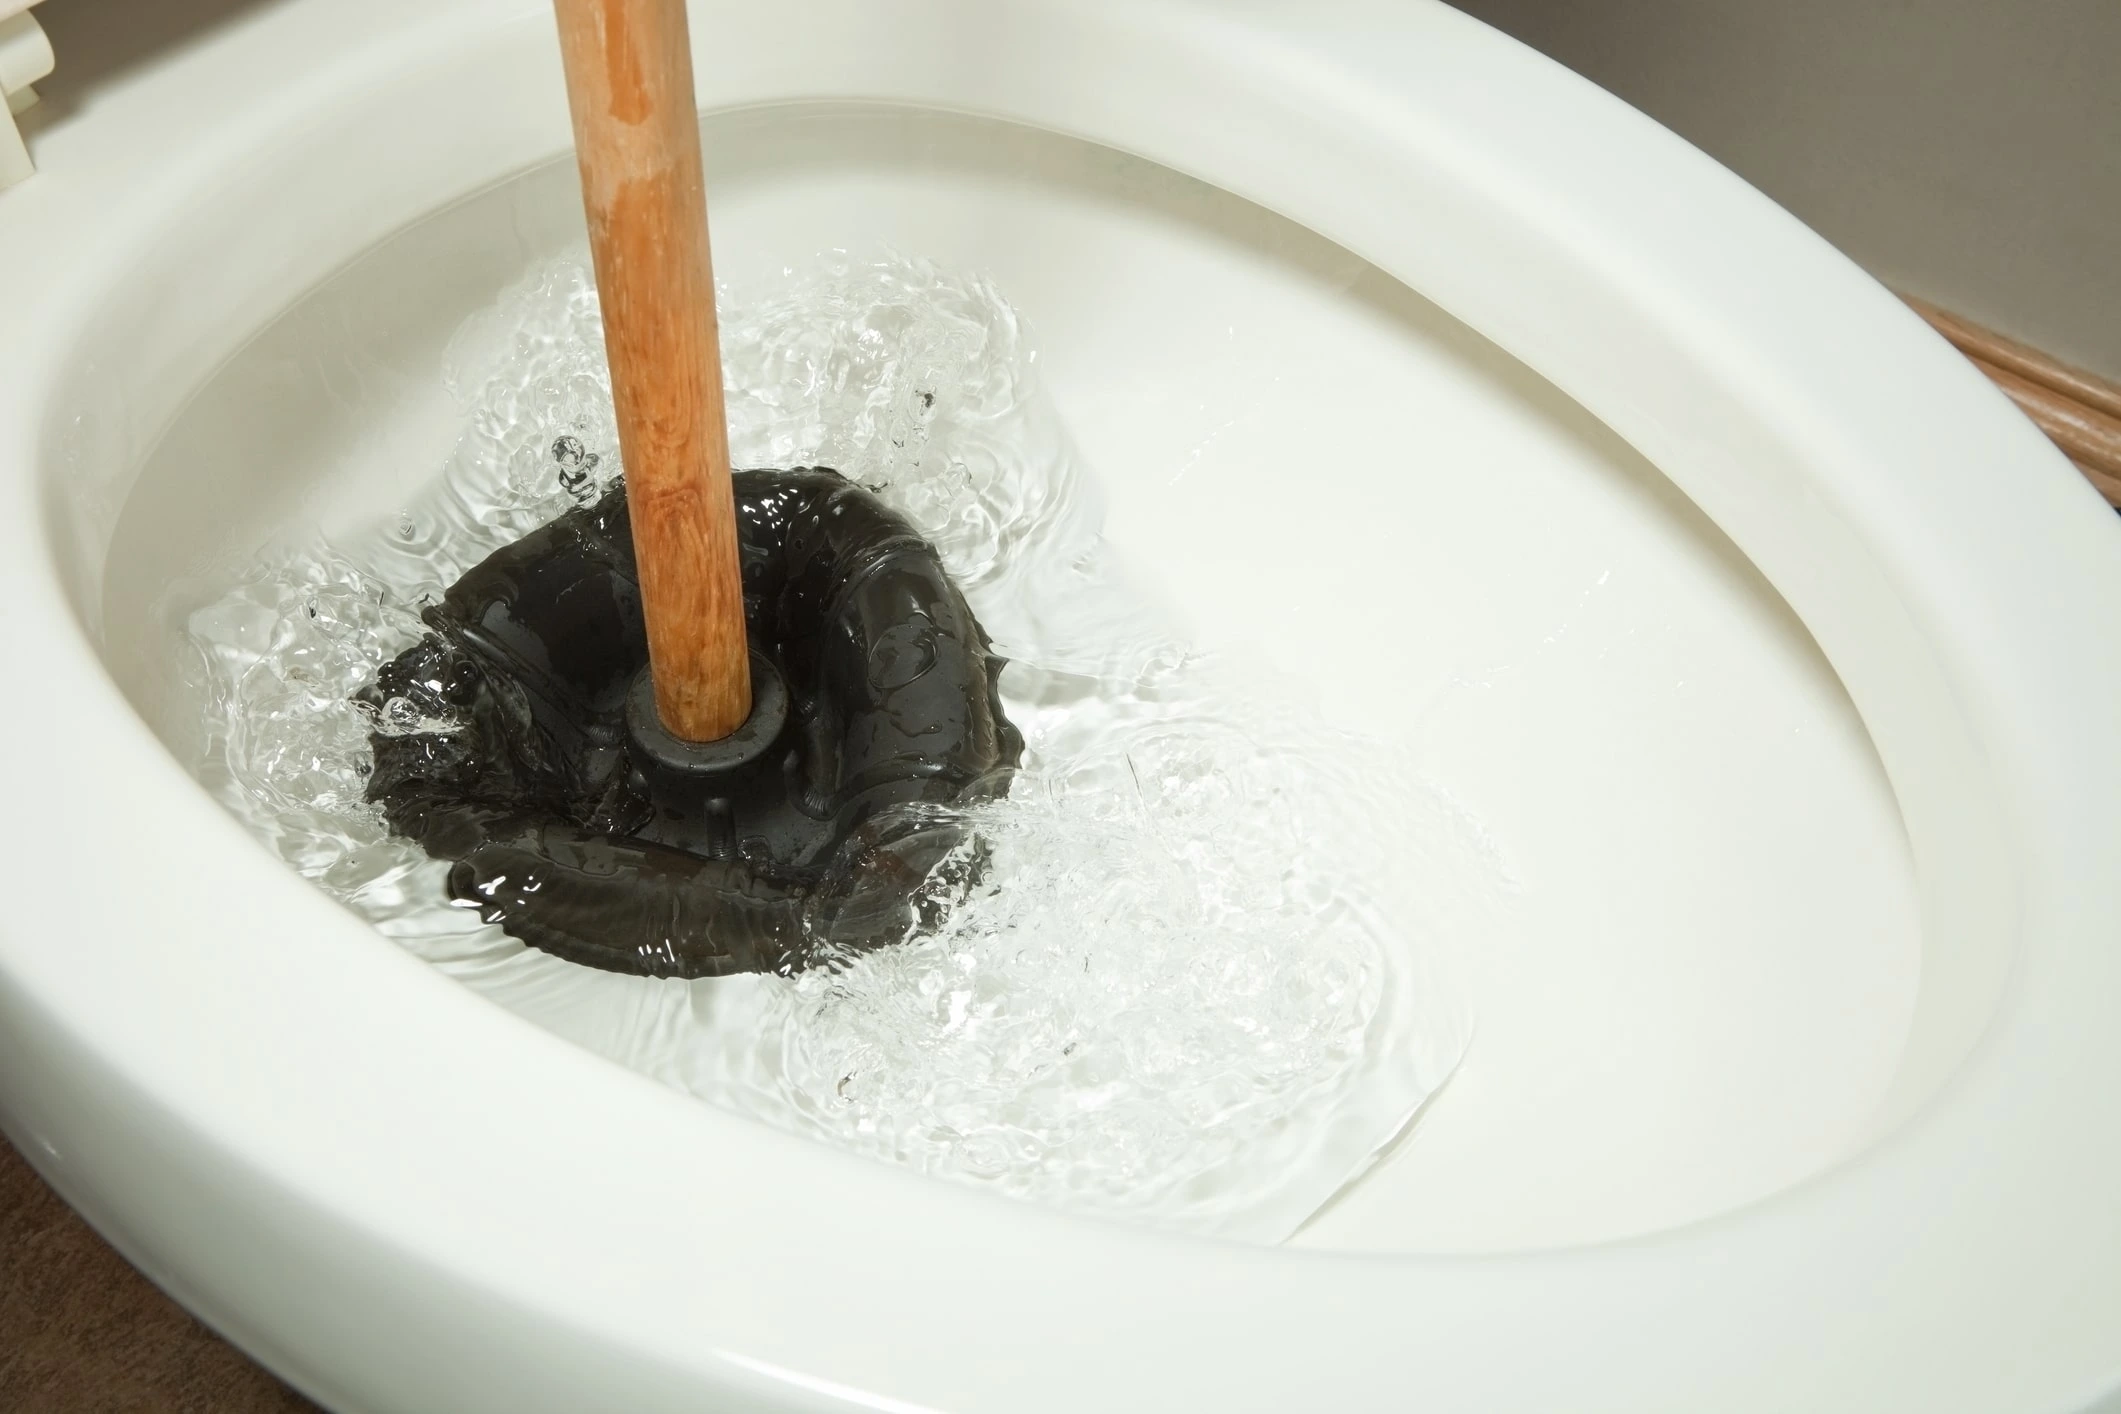 A plunger working to clear a clogged toilet drain